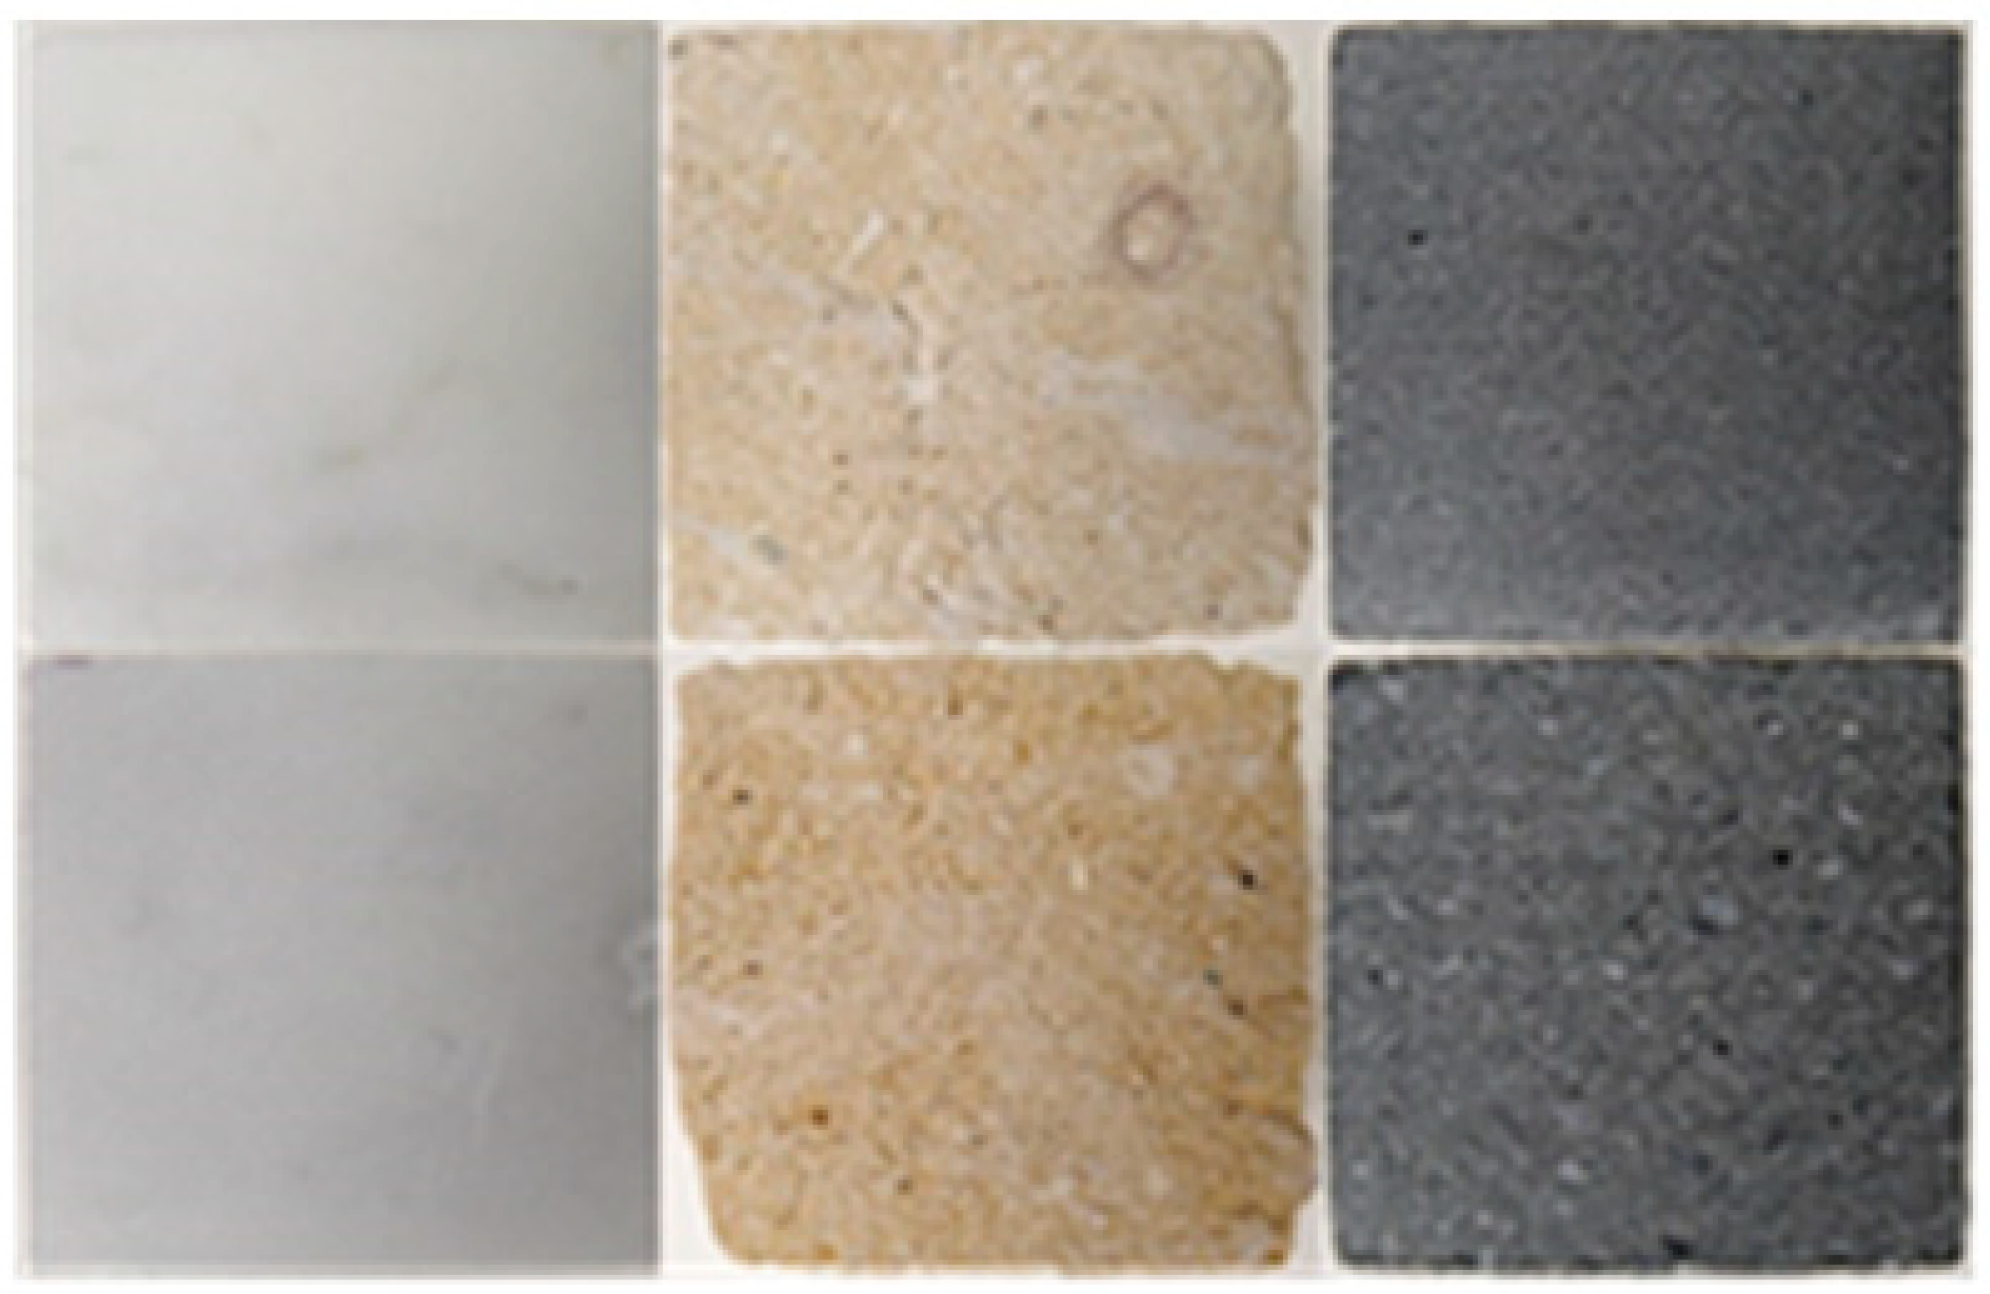 Heritage | Free Full-Text | The Crystallization Effect of Sodium Sulfate on  Some Italian Marbles, Calcarenites and Sandstones